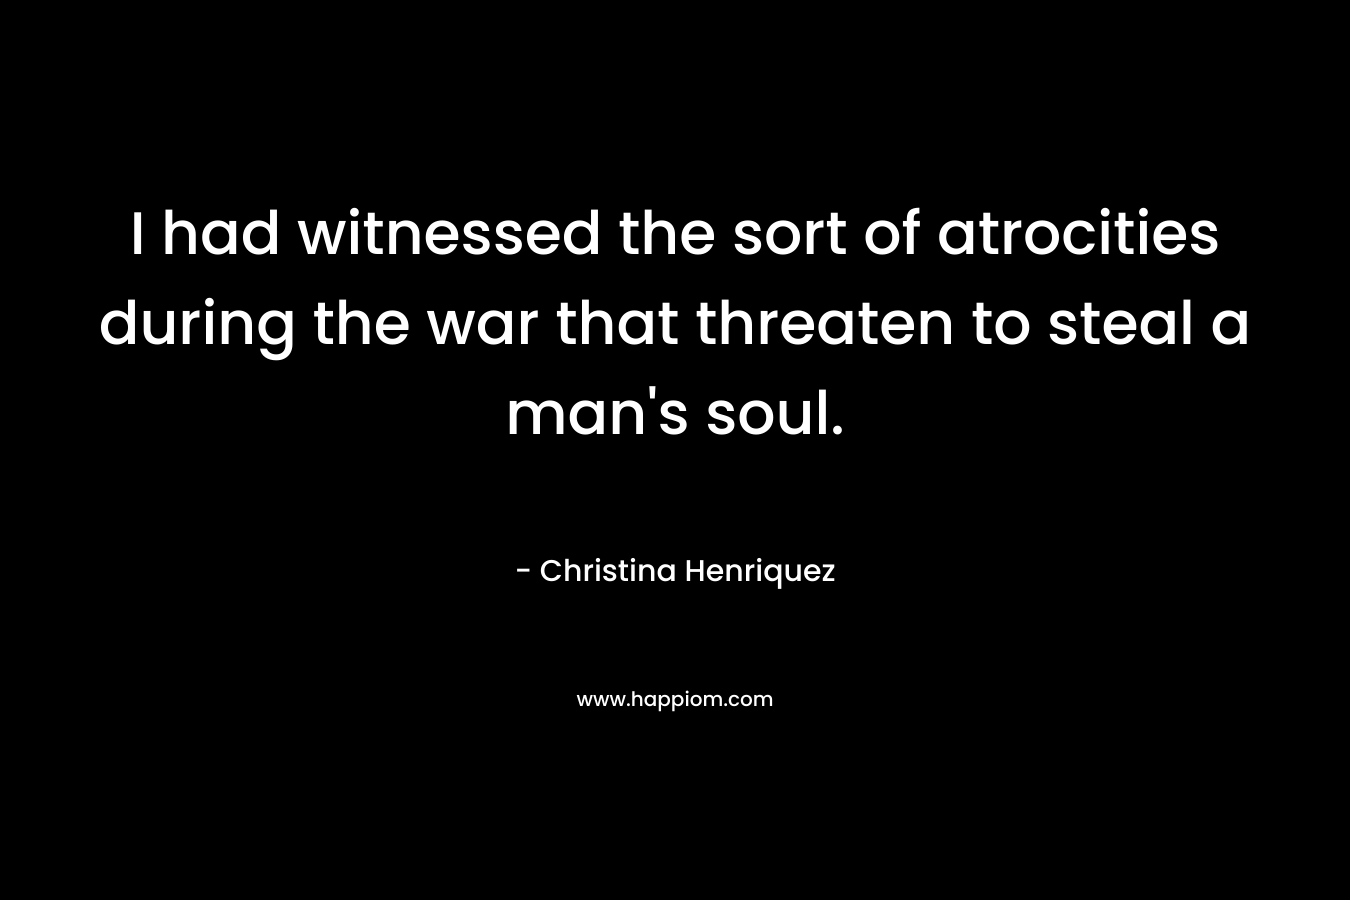 I had witnessed the sort of atrocities during the war that threaten to steal a man’s soul. – Christina Henriquez